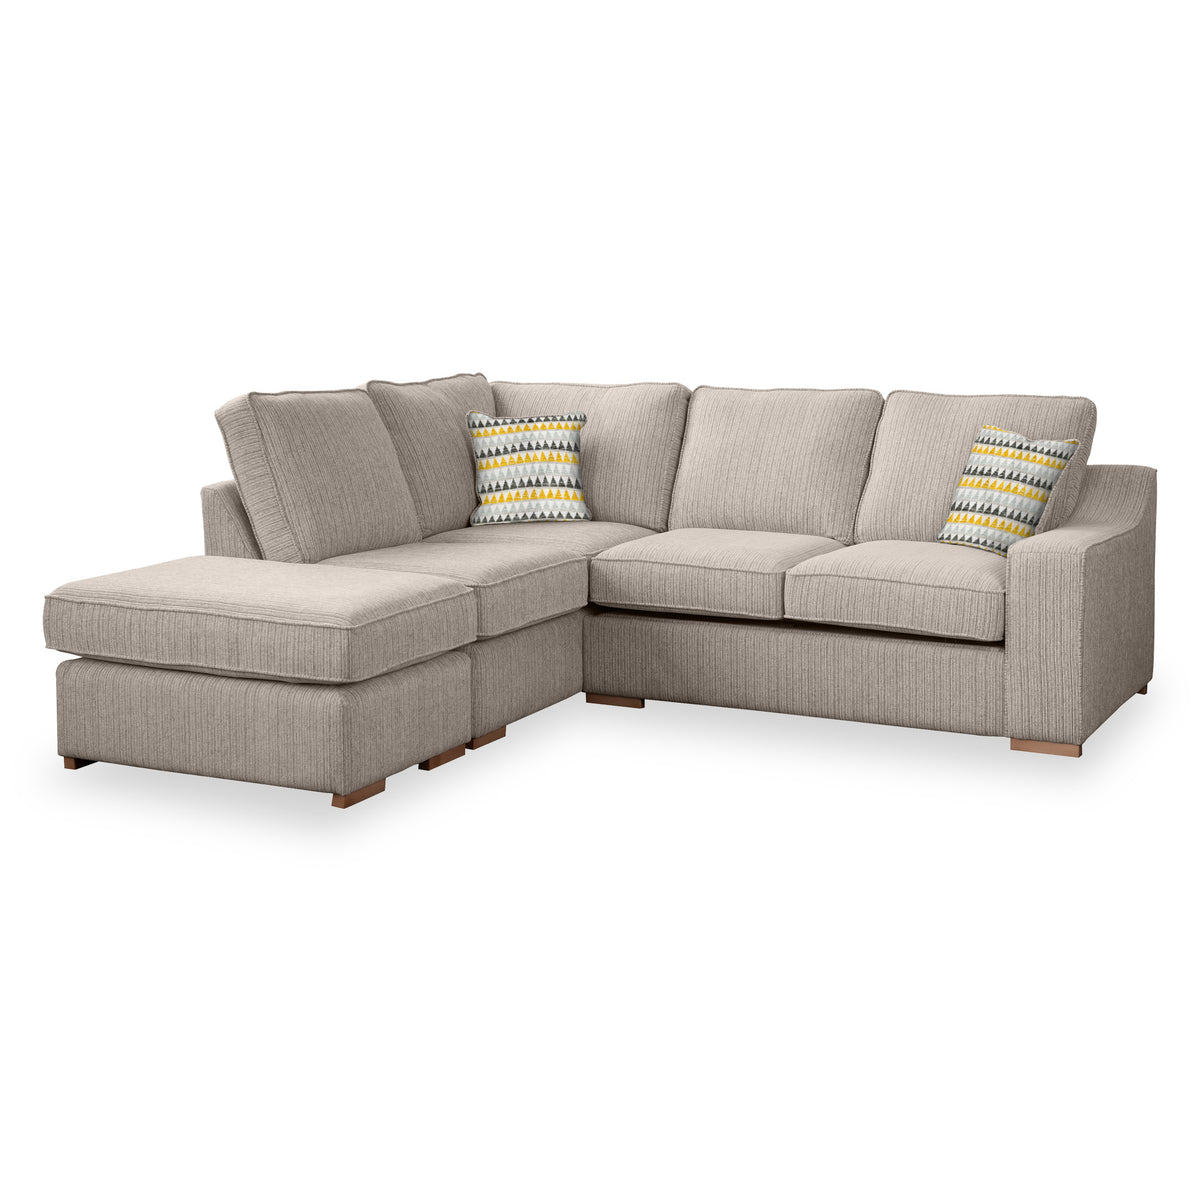 Ashow Beige Left Hand Corner Sofabed with Maika Mustrd Scatter Cushions